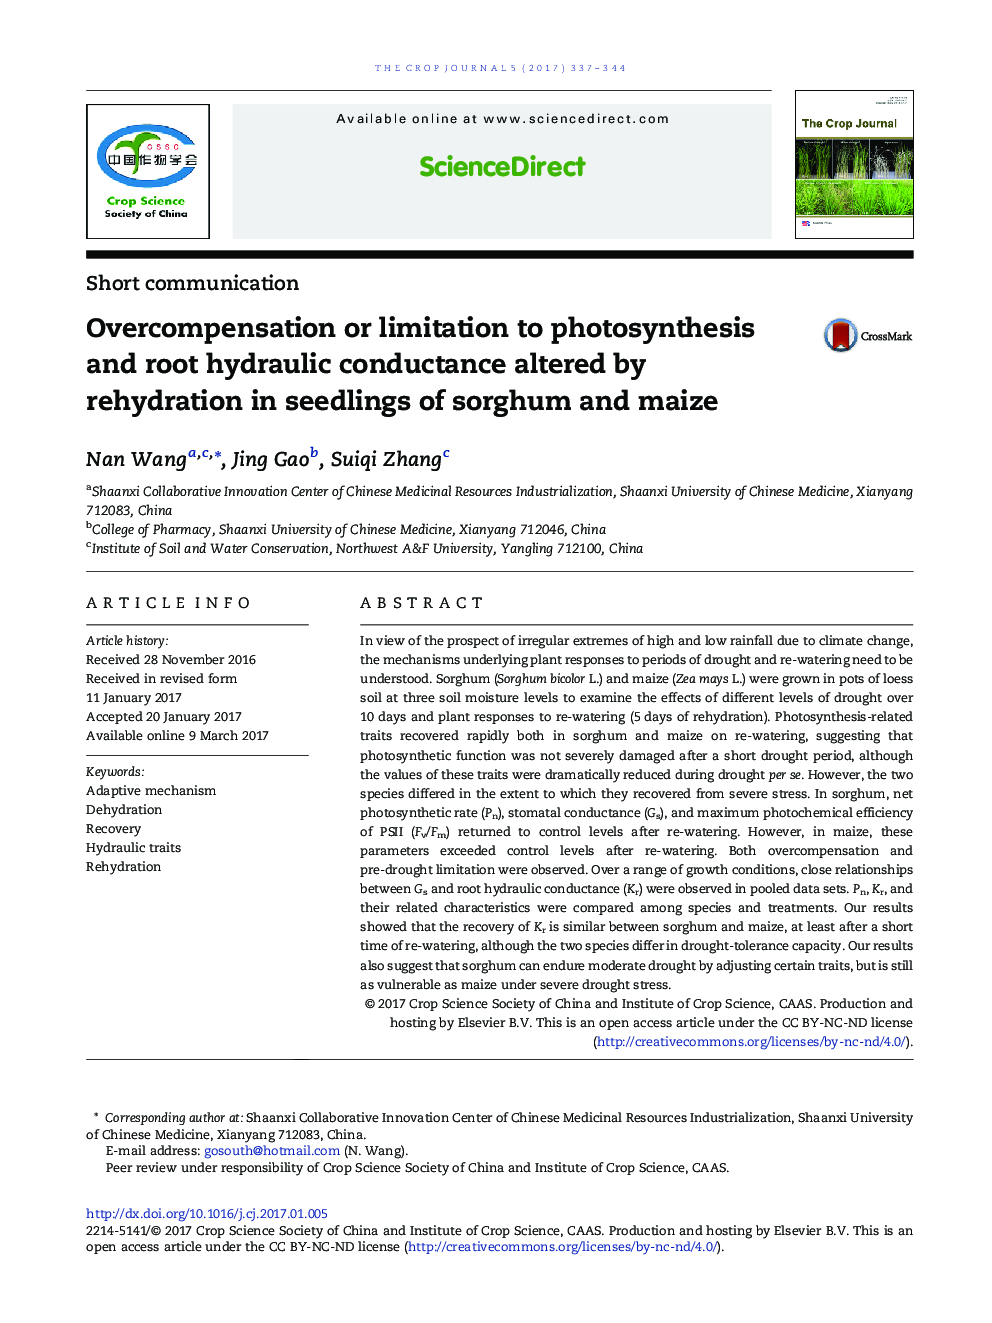 Overcompensation or limitation to photosynthesis and root hydraulic conductance altered by rehydration in seedlings of sorghum and maize